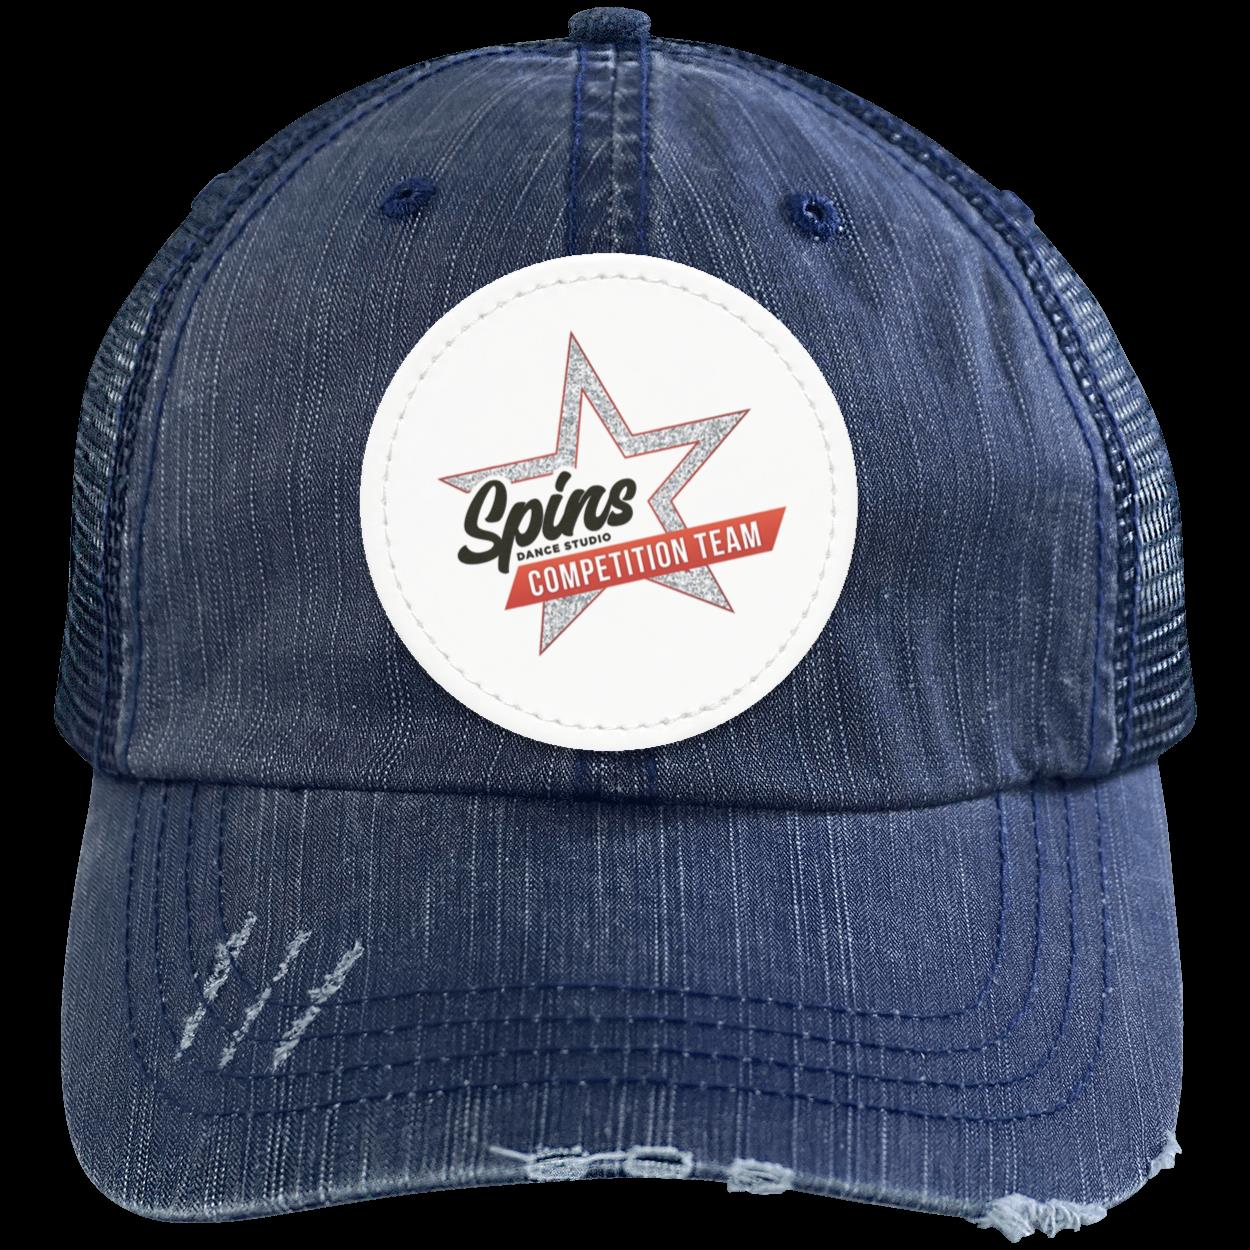 Spins Comp Team Distressed Unstructured Trucker Cap - Vegan Leather Patch